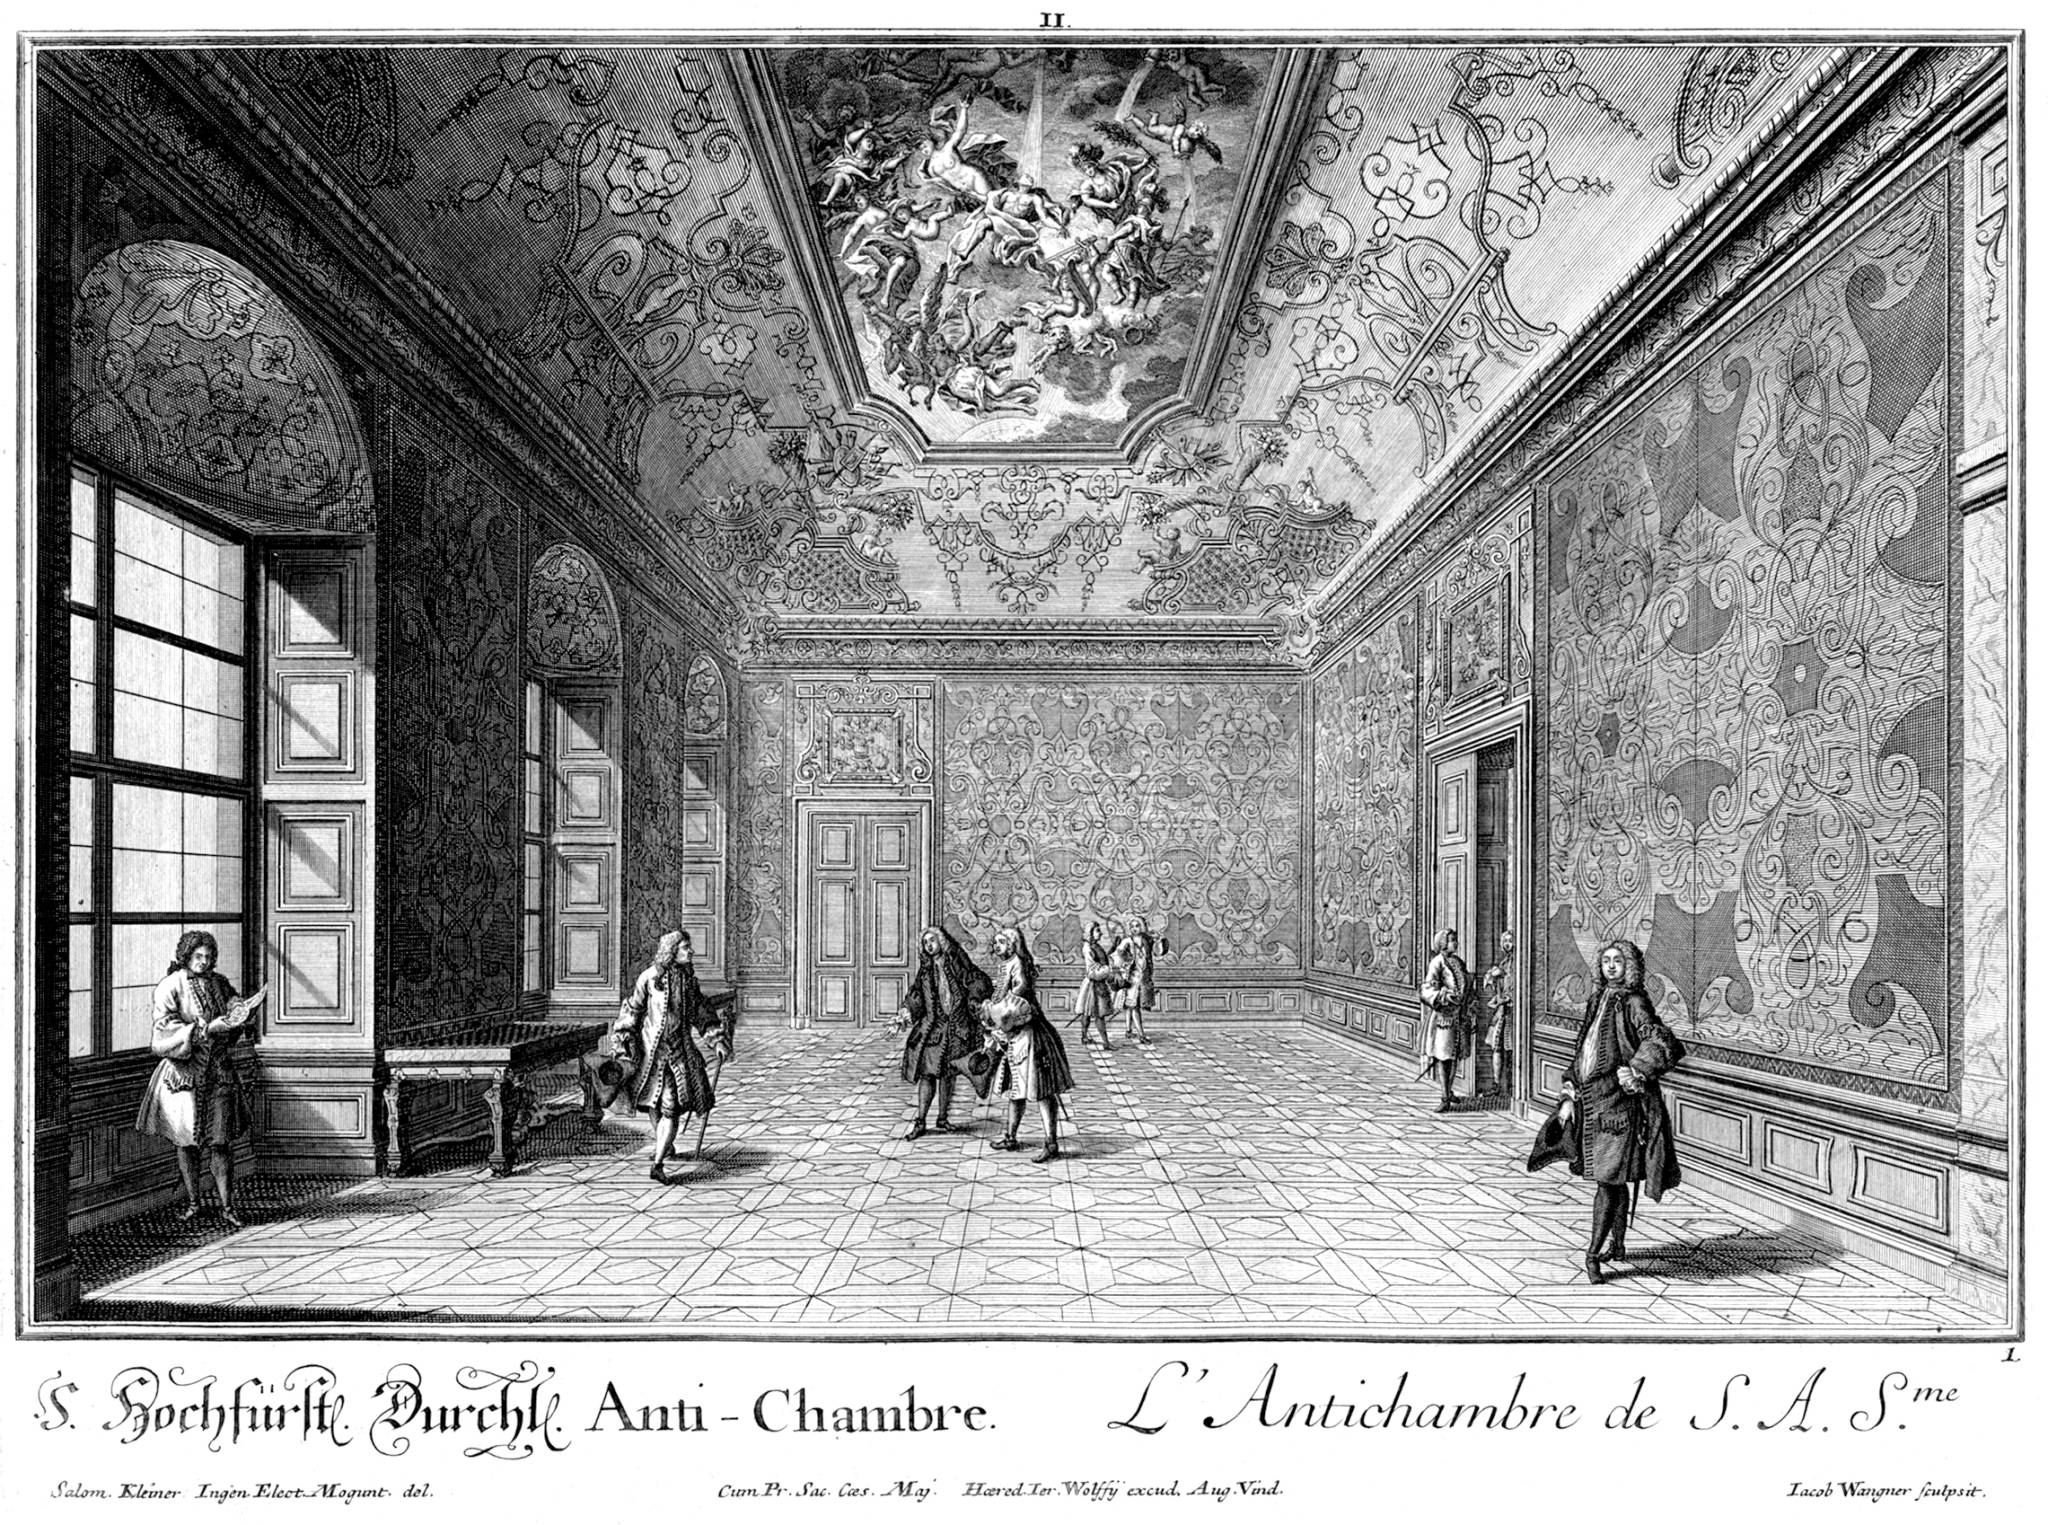 The Antechamber: Toward a History of Waiting - Helmut Puff